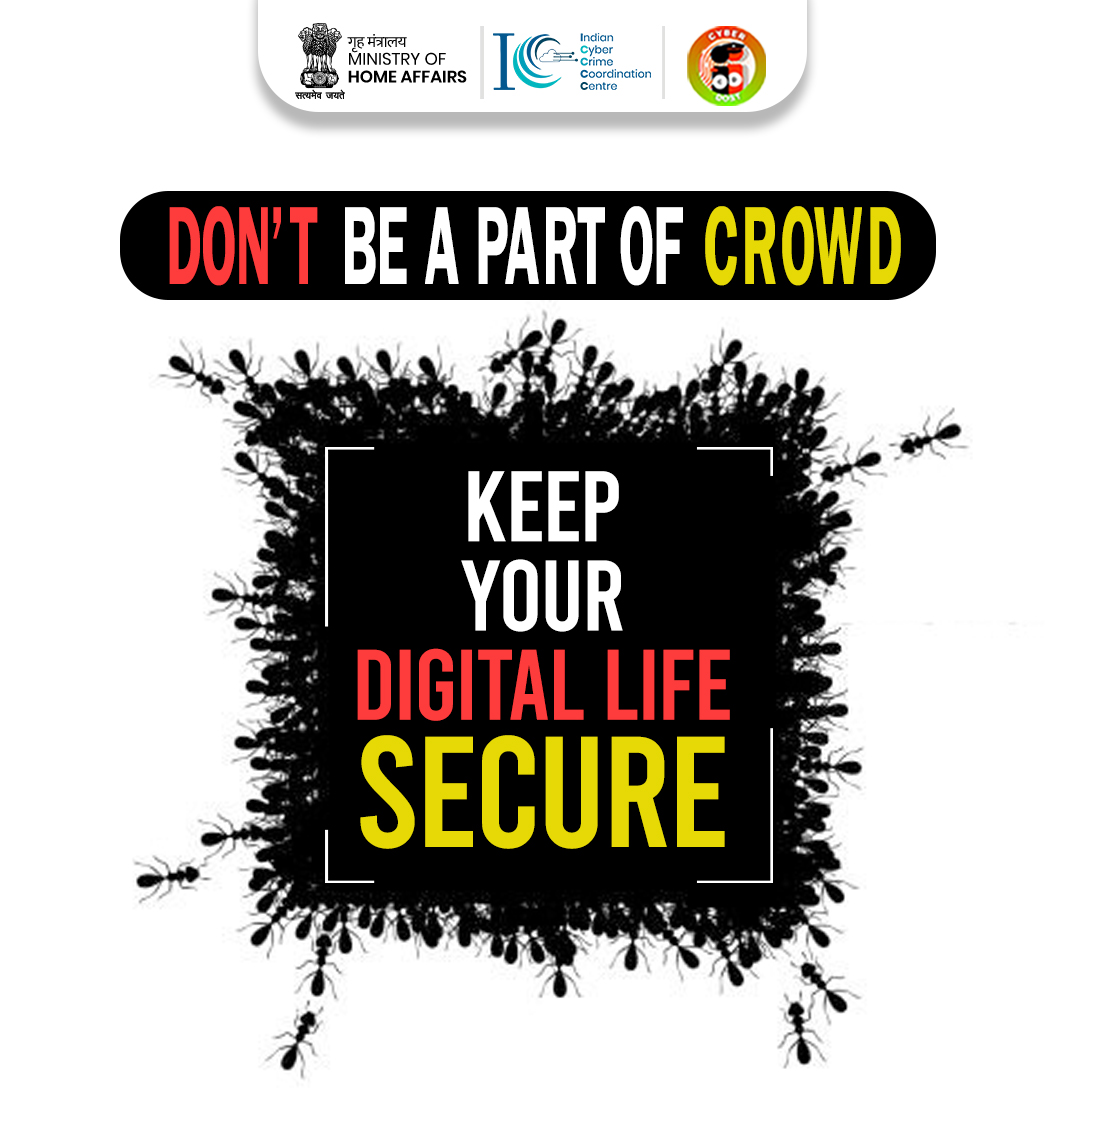 Follow cyber hygienic practices to keep your #DigitalLife - Secure. In case of online financial fraud #Dial1930 and file a complaint at cybercrime.gov.in 

#Cyber #MondayMotivation #StrongPassword #SocialMedia #Private #CyberSafe #I4C #MHA #Cybercrime